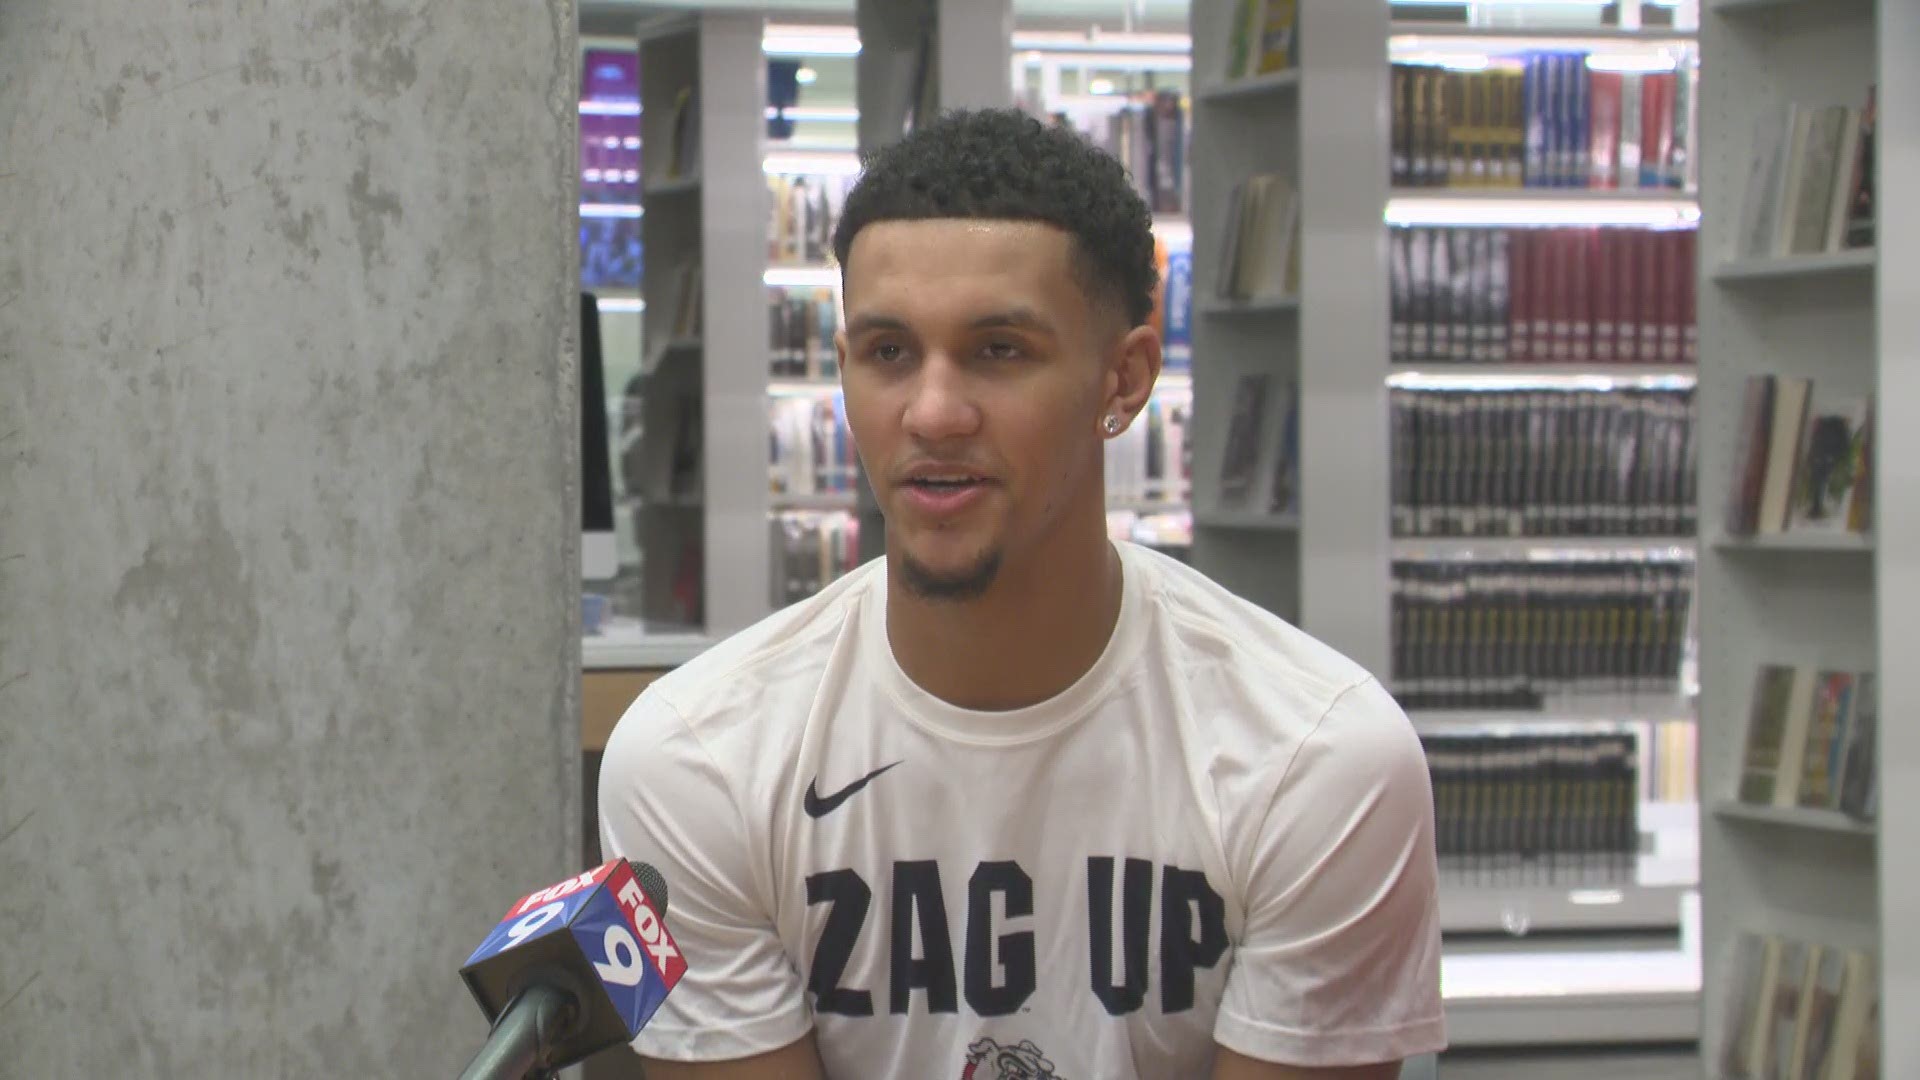 Minnehaha Academy standout Jalen Suggs discusses his decision to play basketball for Gonzaga University.